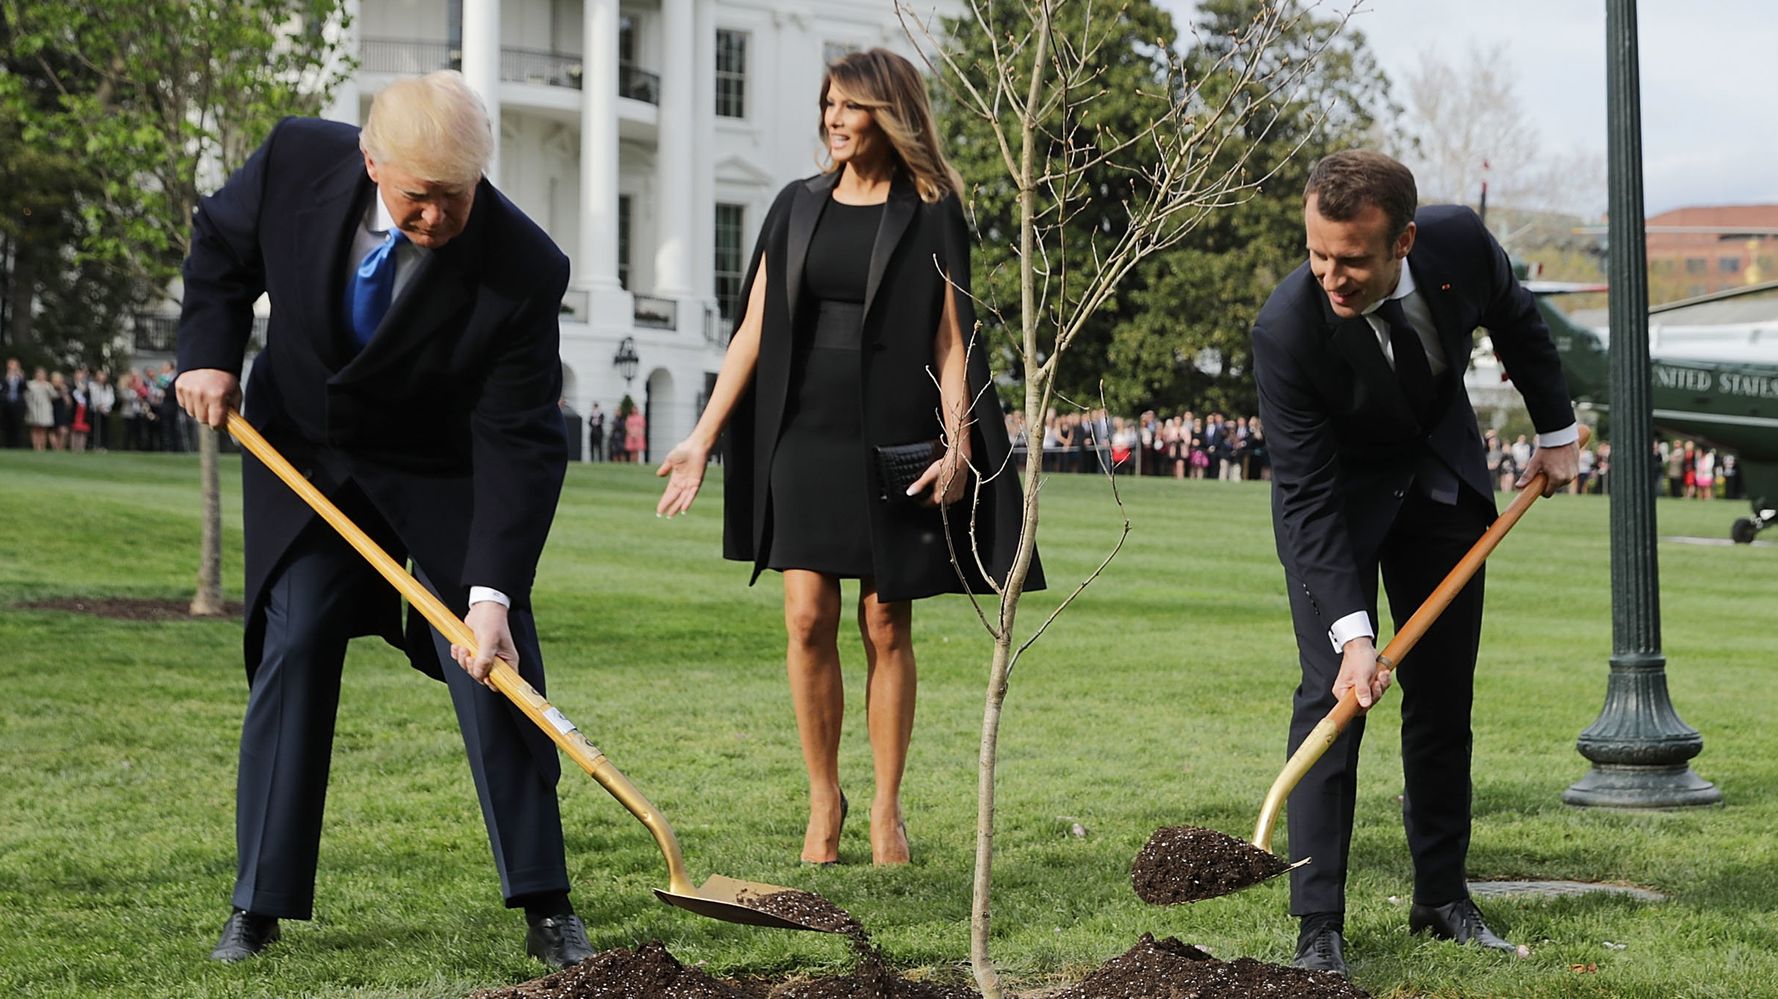 Liberal Hypocrisy: As Trump Announces Plans to Help Worldwide Effort to Plant 1 Trillion Trees, Liberal Rag Says it ‘Might NOT actually be a Good Idea’